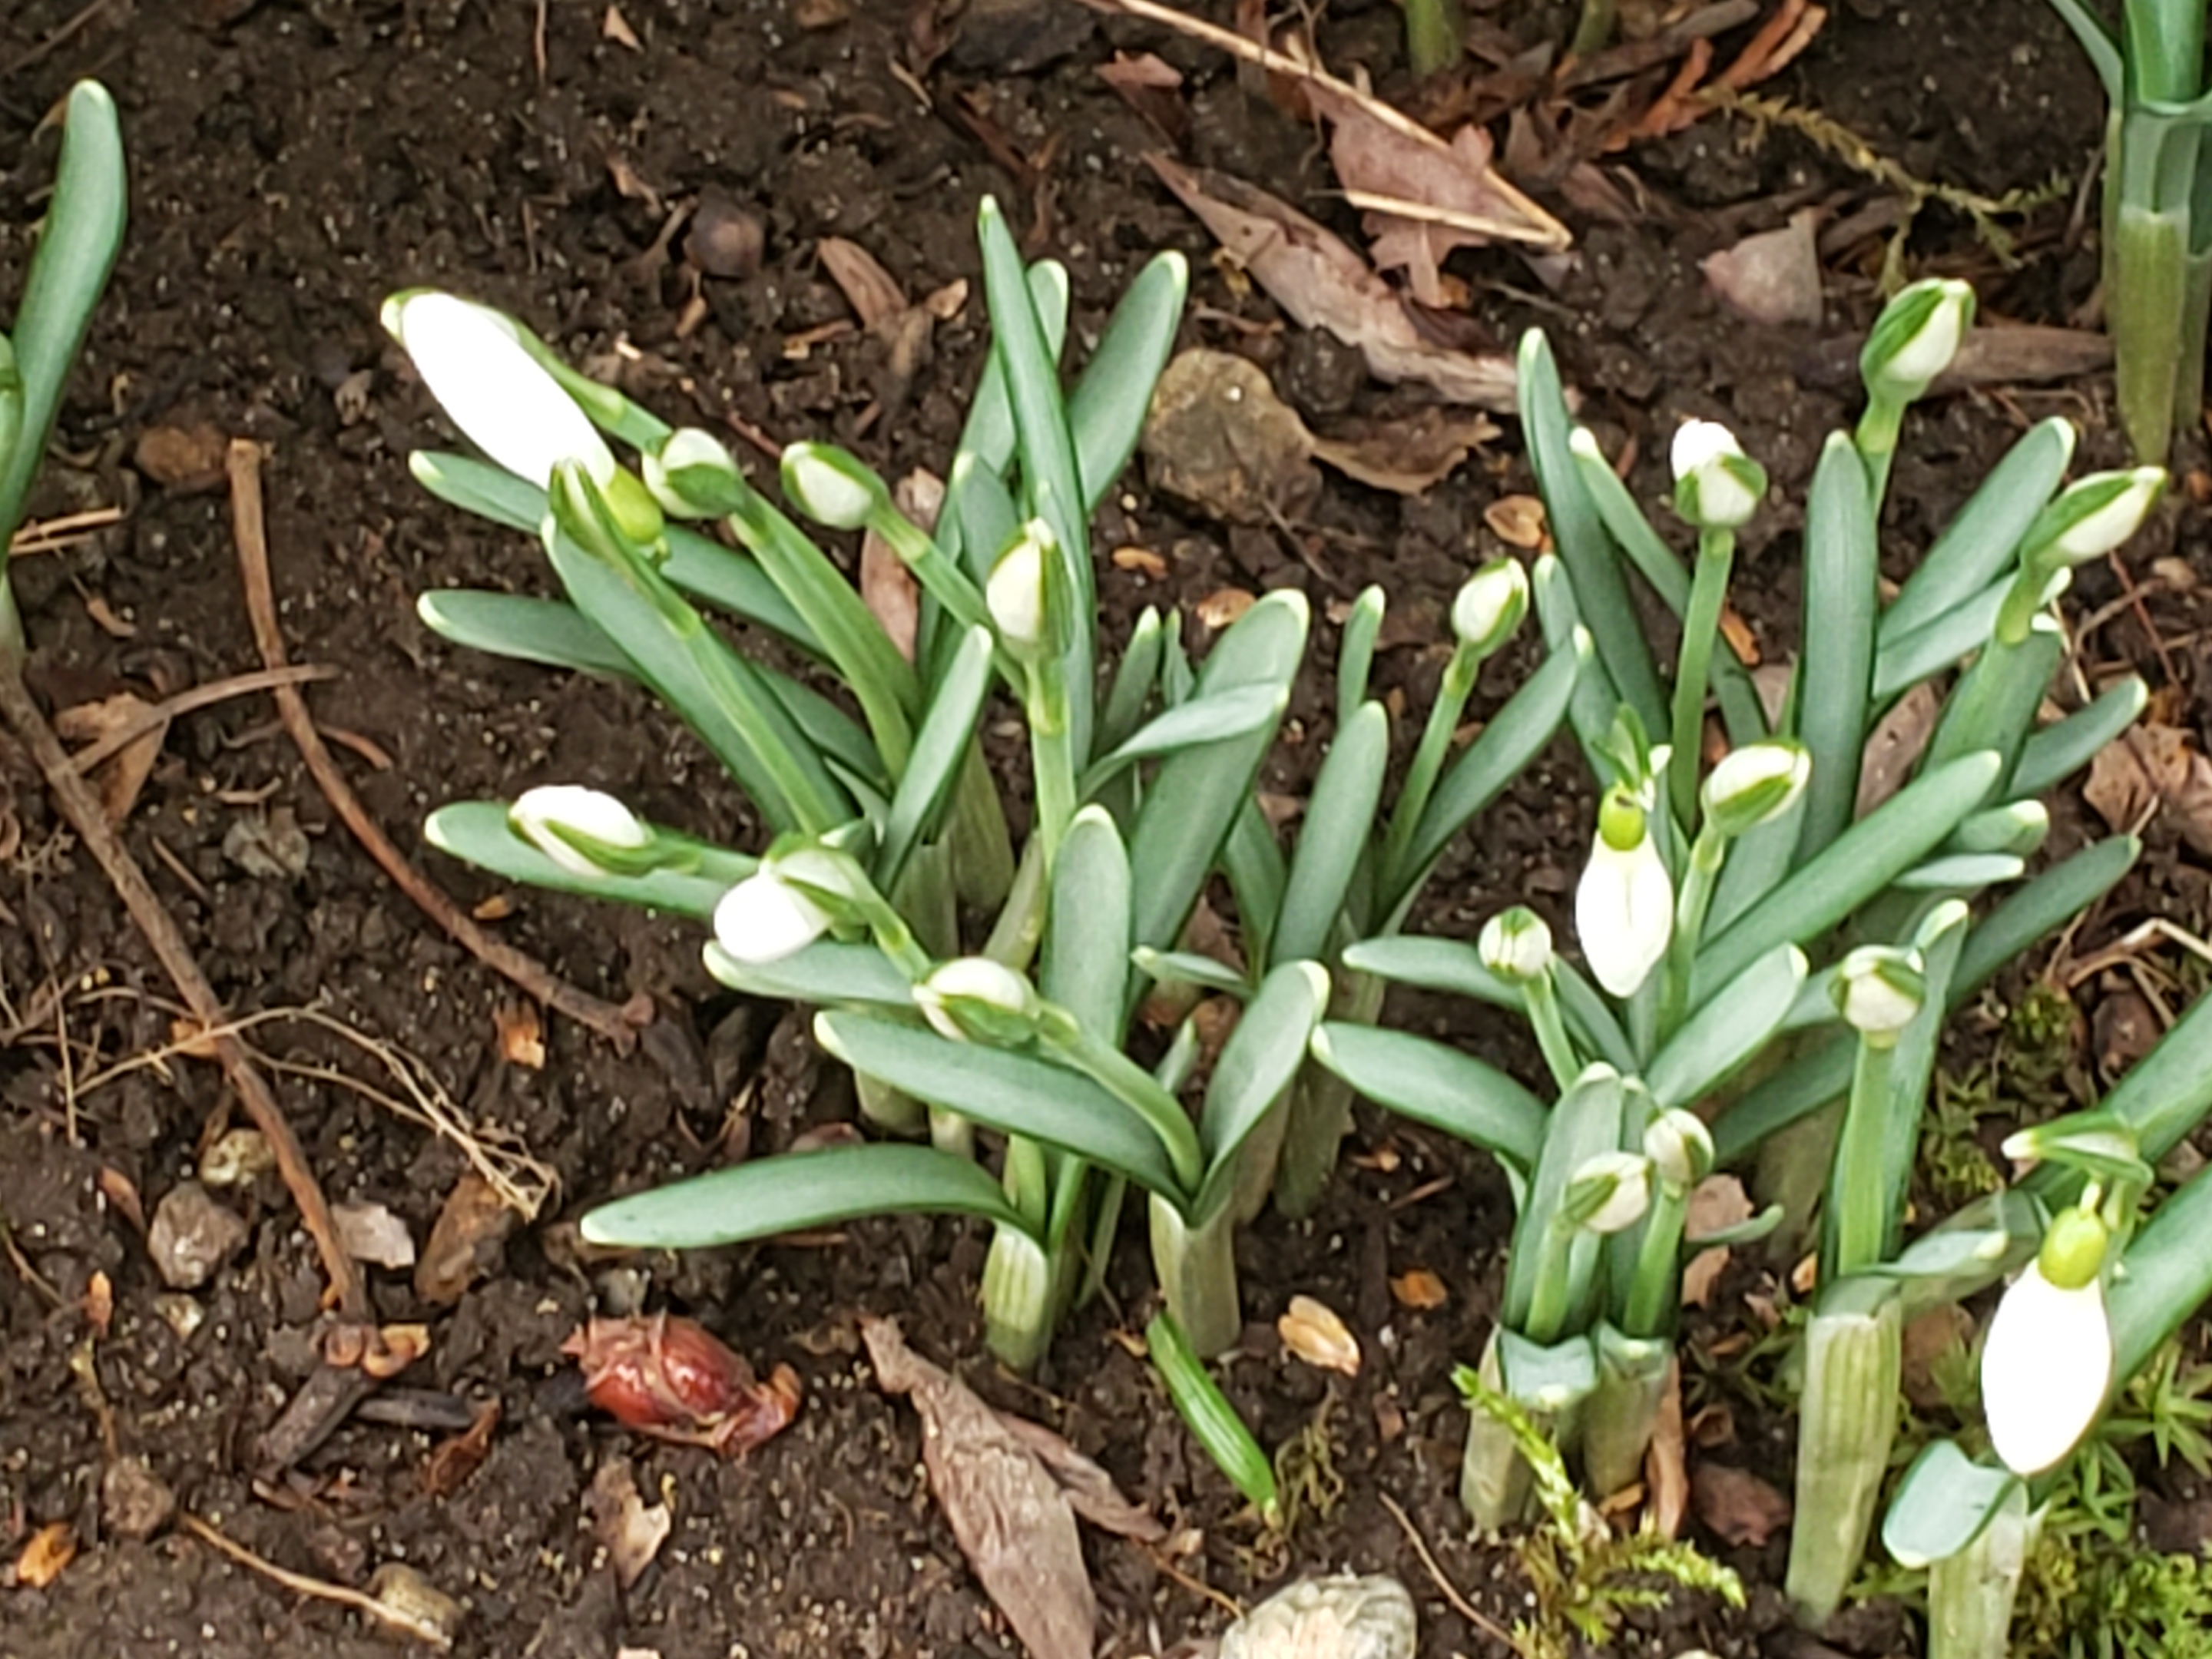 snowdrops soon to open